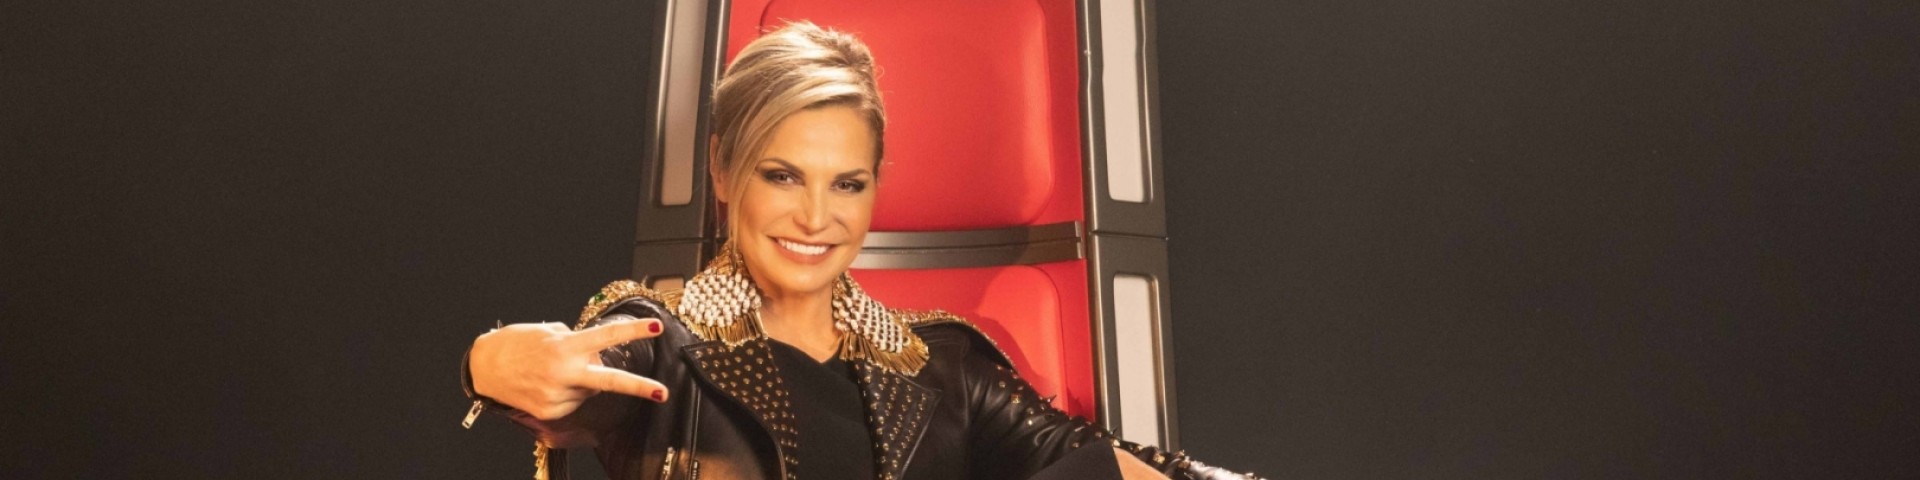 The Voice of Italy 6: registrate le prime Blind Auditions - Foto